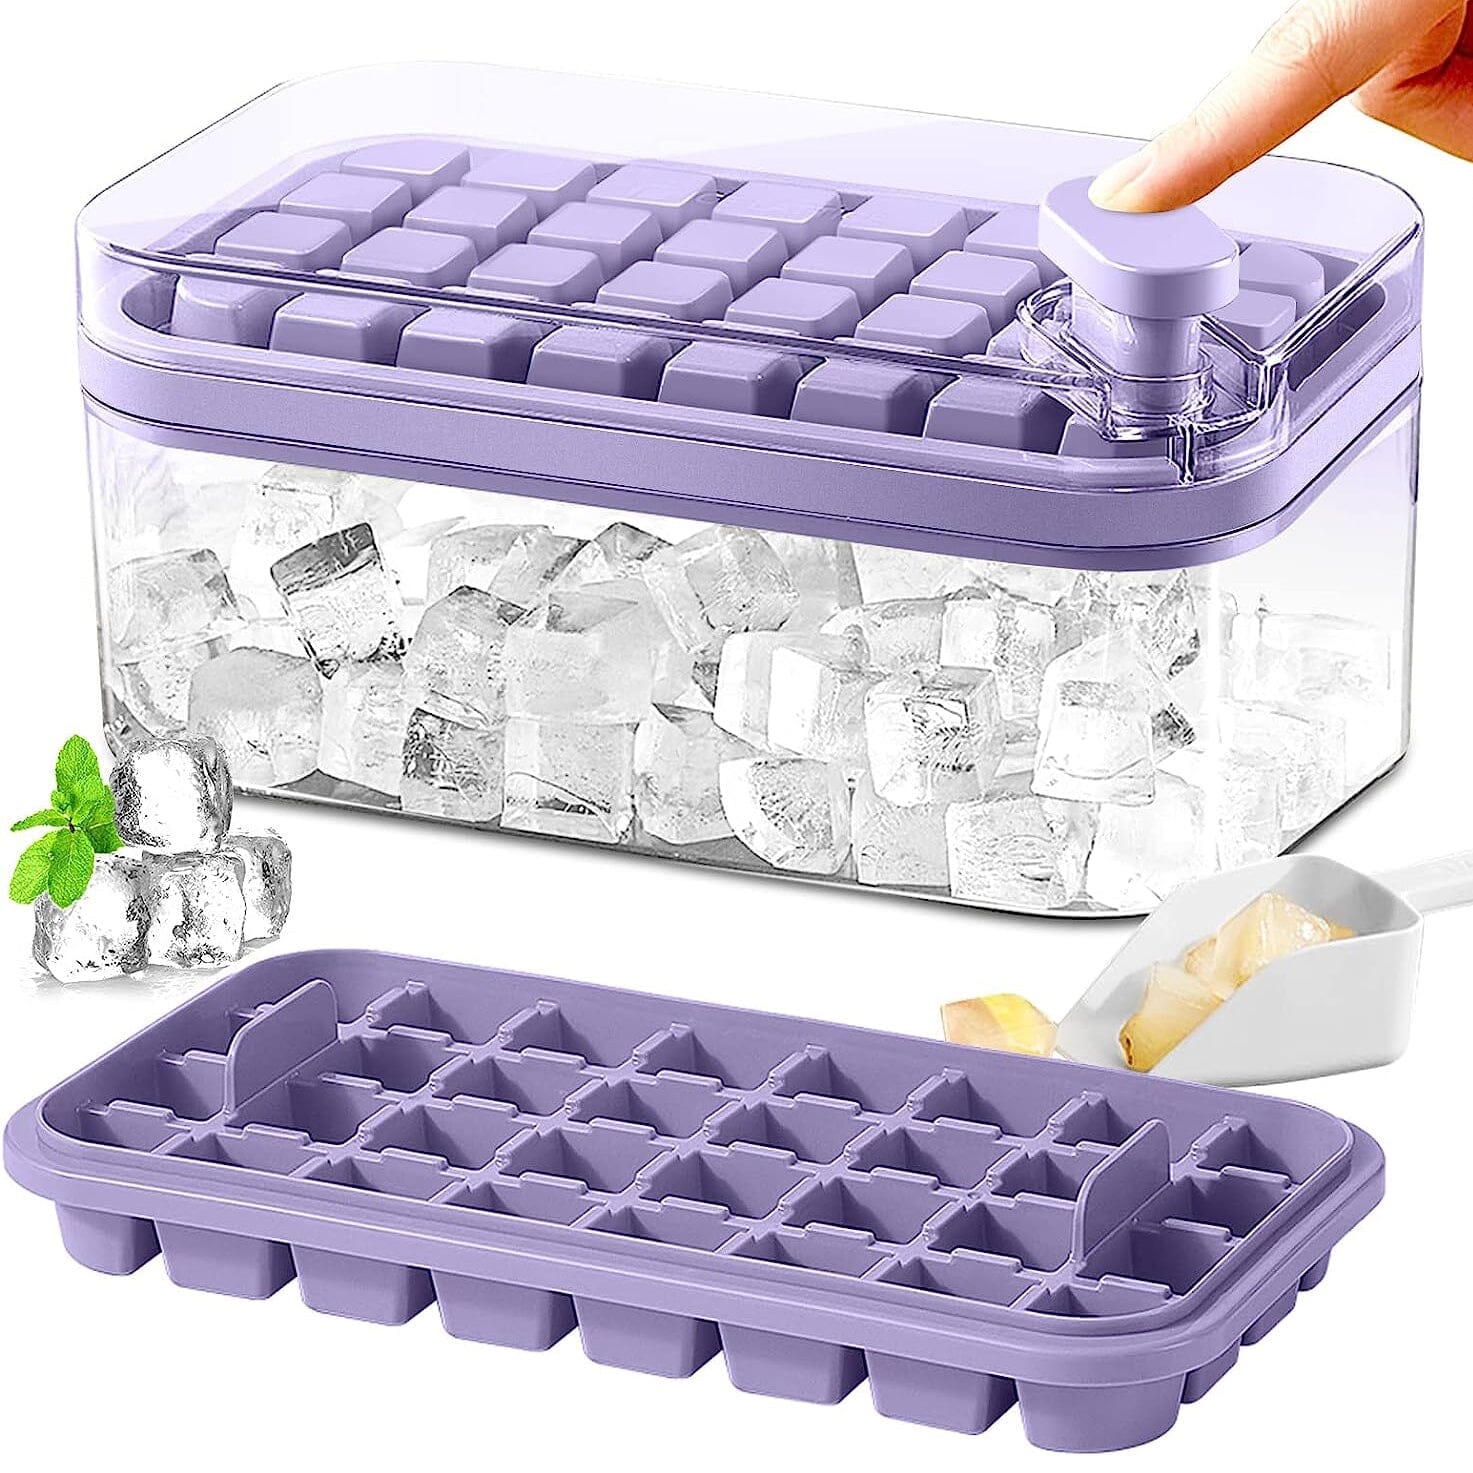 https://dailysale.com/cdn/shop/products/101oz-ice-cube-tray-set-64-pcs-silicone-ice-cube-tray-with-lid-bin-kitchen-tools-gadgets-purple-dailysale-672704.jpg?v=1692298891